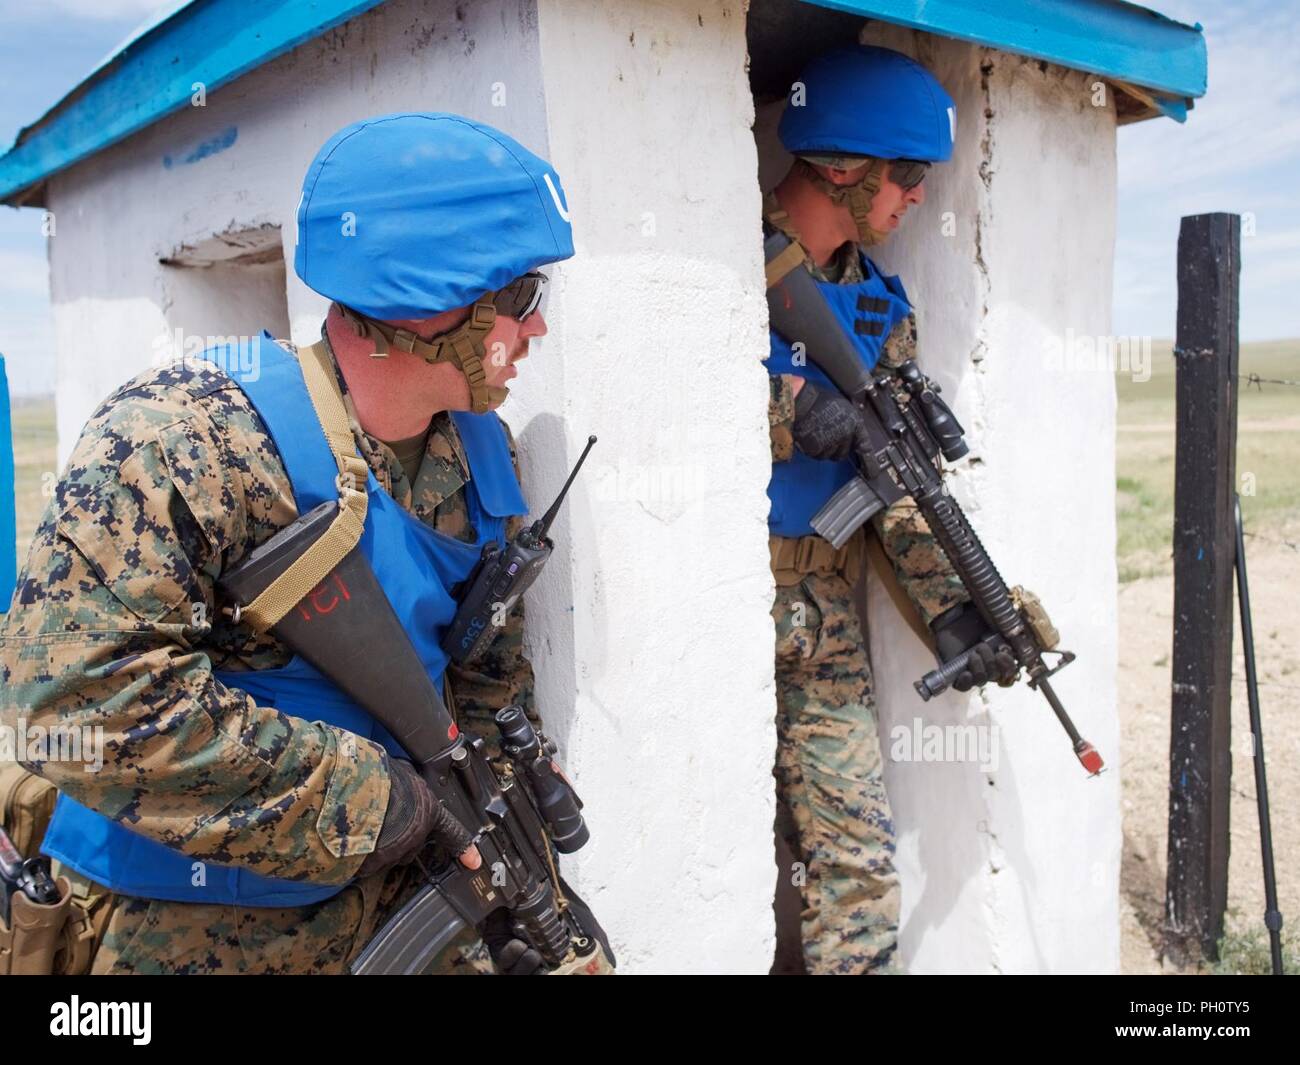 U.S. Marine Corps Cpl. Domenick DiGiovannangelo, and Lance Cpl. Tanner Yeager, both of 3rd Law Enforcement Battalion, take cover after two men initiated a simulated firefight June 20, 2018, during Khaan Quest 2018 entry control point operations training at Five Hills Area, Mongolia. The purpose of Khaan Quest is to gain U.N. training and certification for the participants through the conduct of realistic peace support operations, to include increasing and improving U.N. peacekeeping interoperability and military relationships among the participating nations. Stock Photo